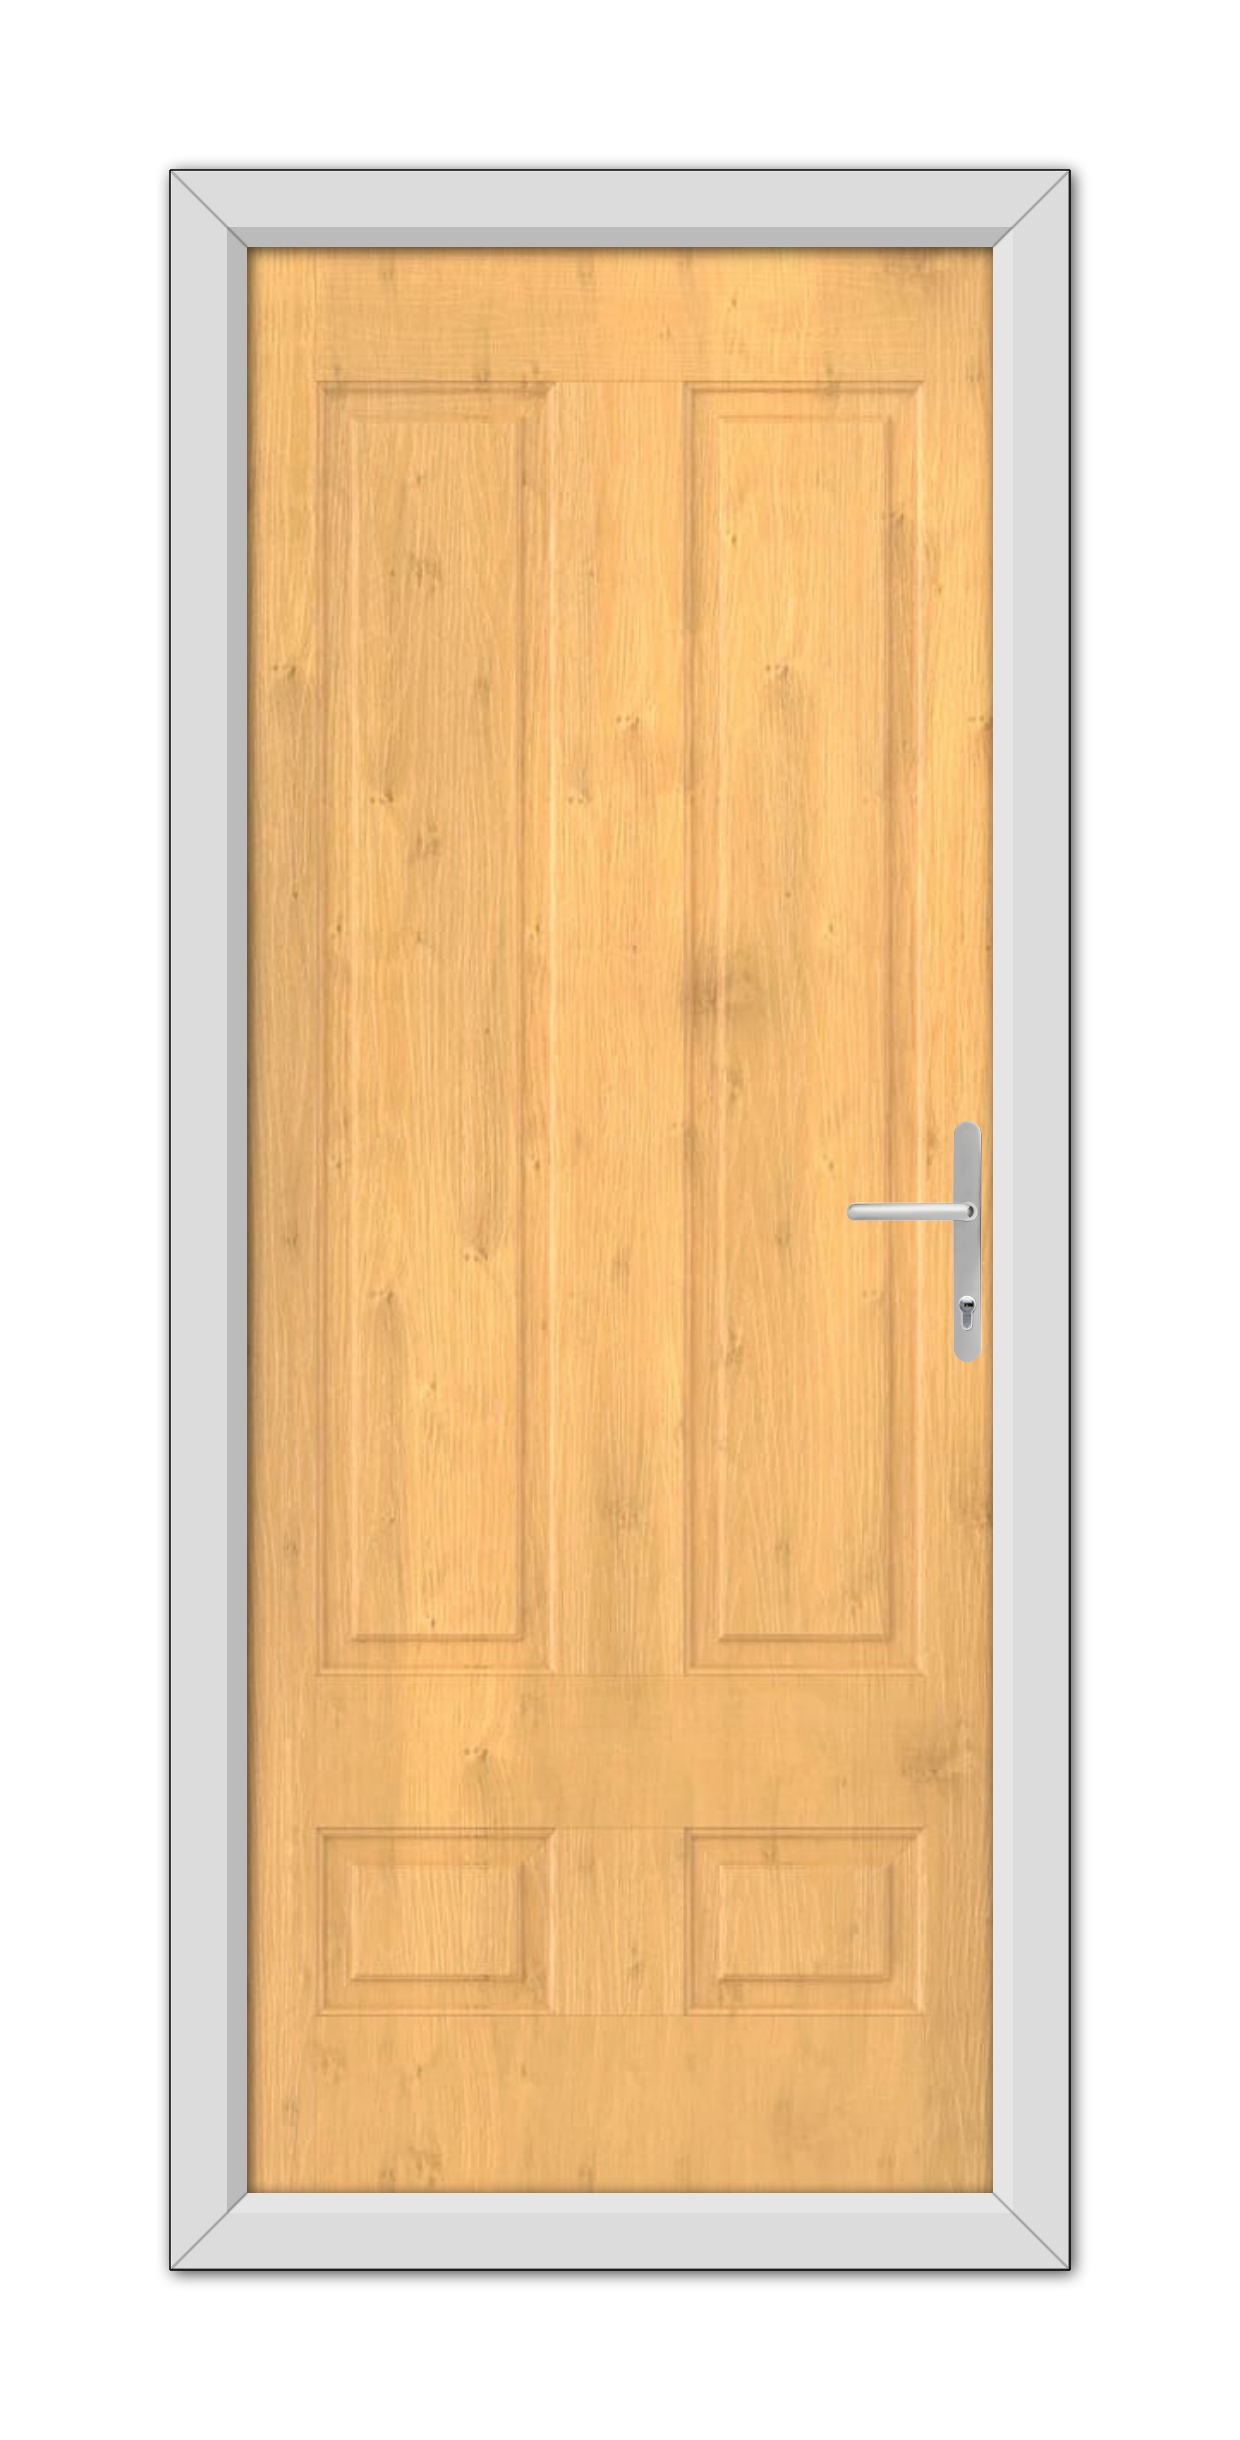 A Irish Oak Aston Solid Composite Door 48mm Timber Core with a metal handle, framed by a grey door frame, viewed head-on.